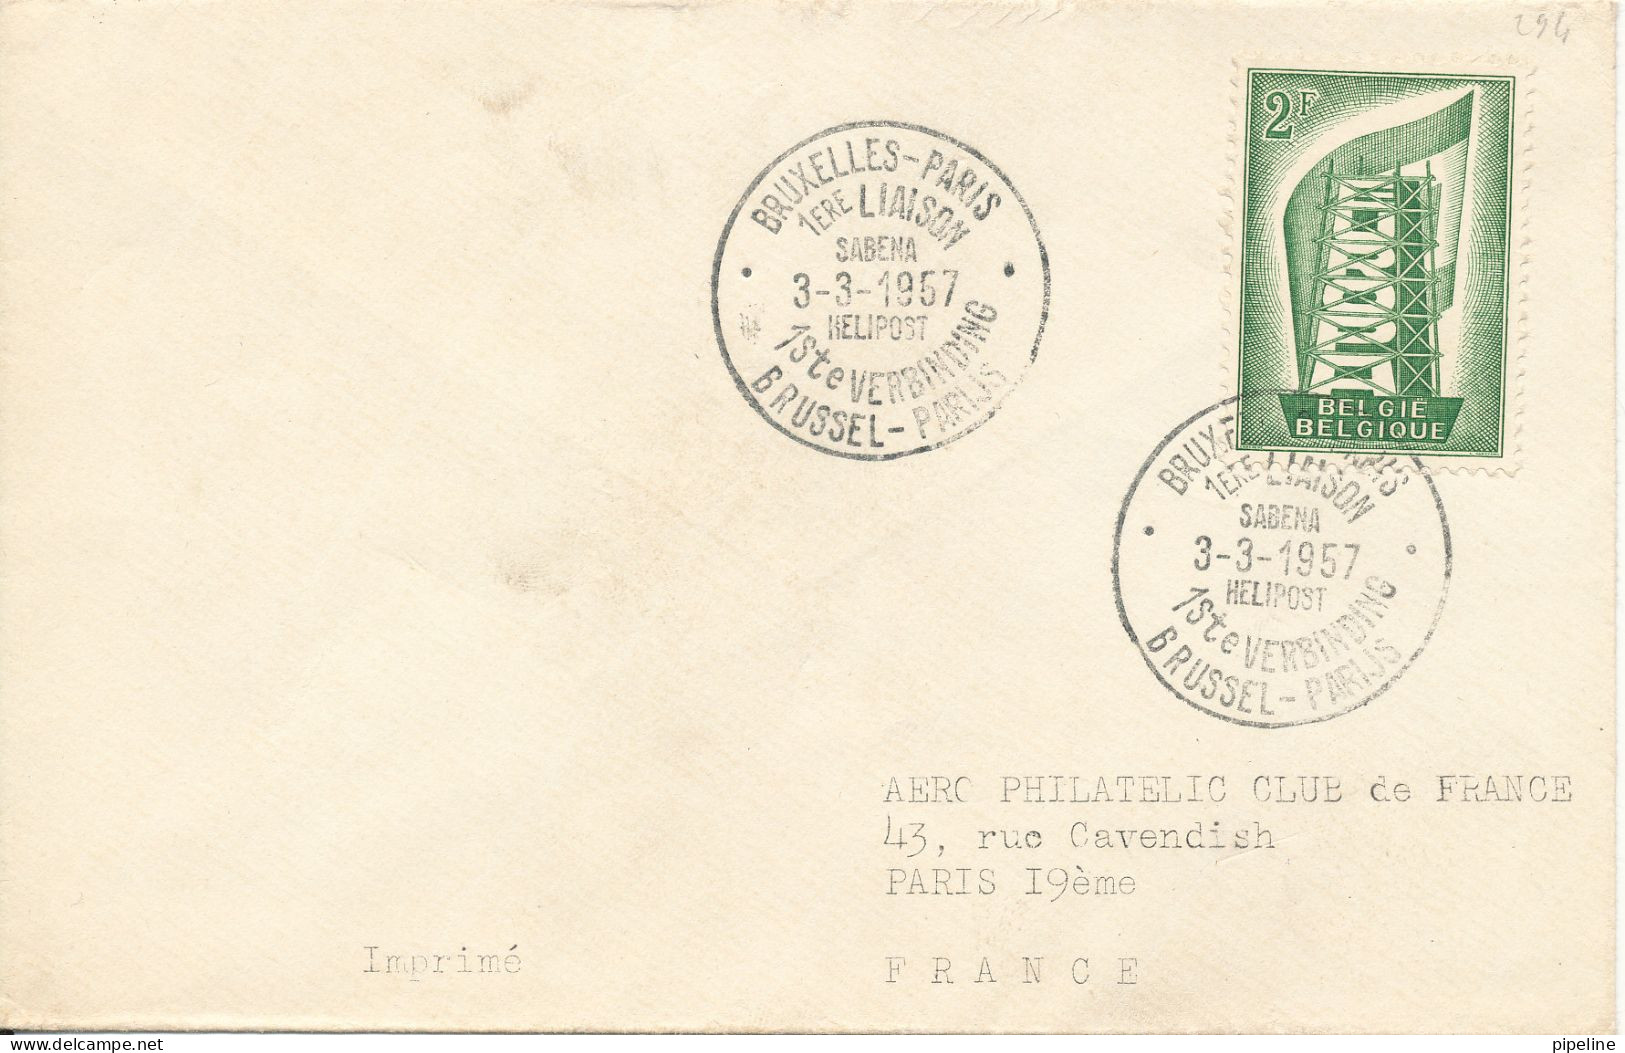 Belgium Cover First Helicopter Flight Sabena Bruxelles - Paris 3-3-1957 - Covers & Documents